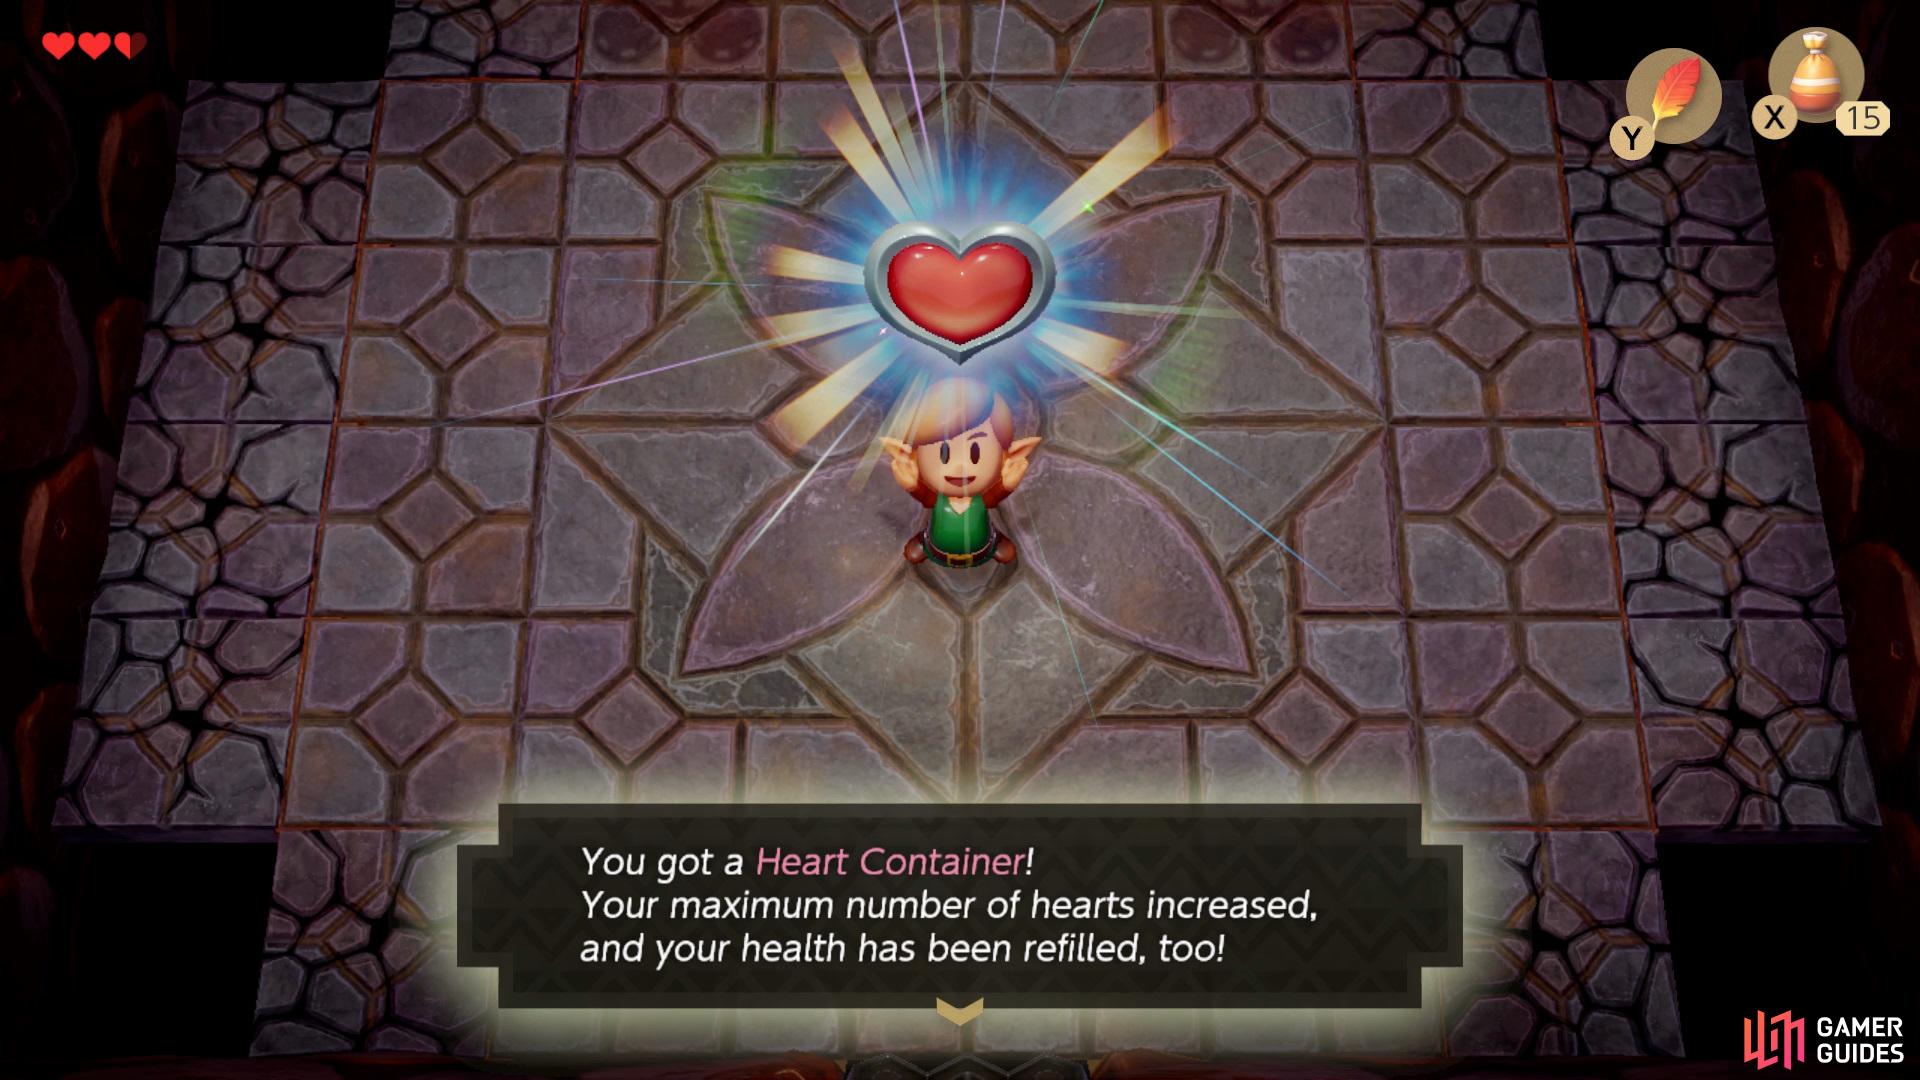 and then collect a Heart Container as your reward.